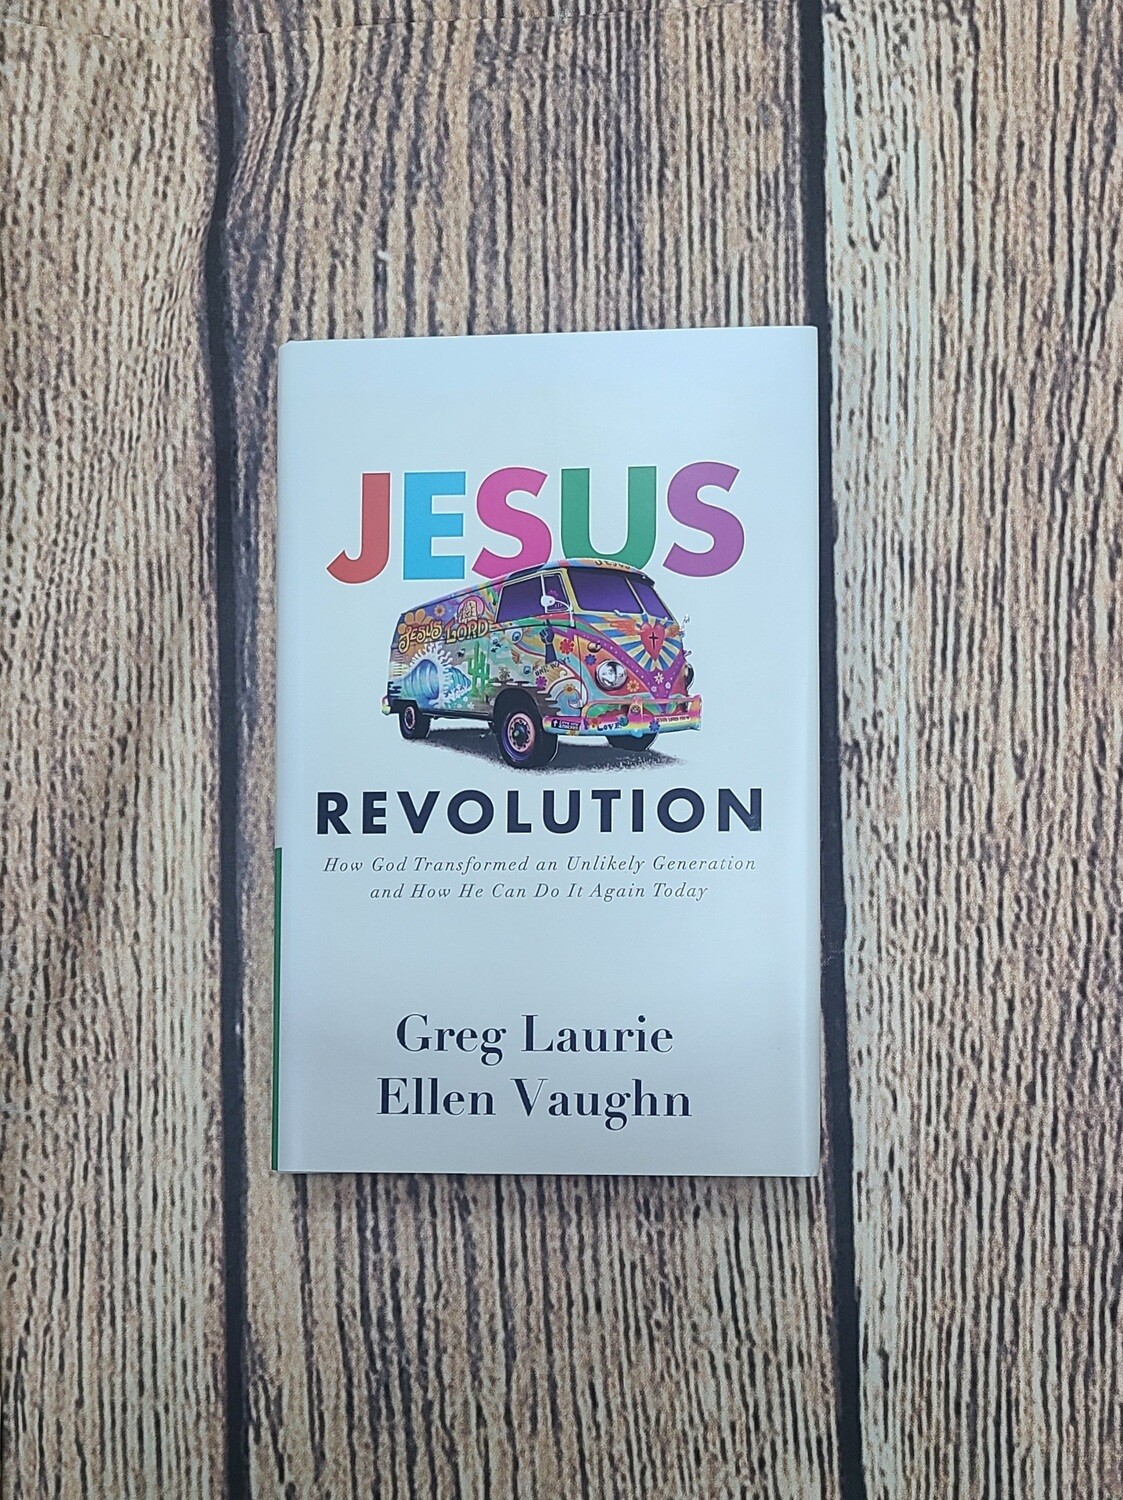 Jesus Revolution: How God Transformed an Unlikely Generation and How He Can Do It Again Today by Greg Laurie and Ellen Vaughn